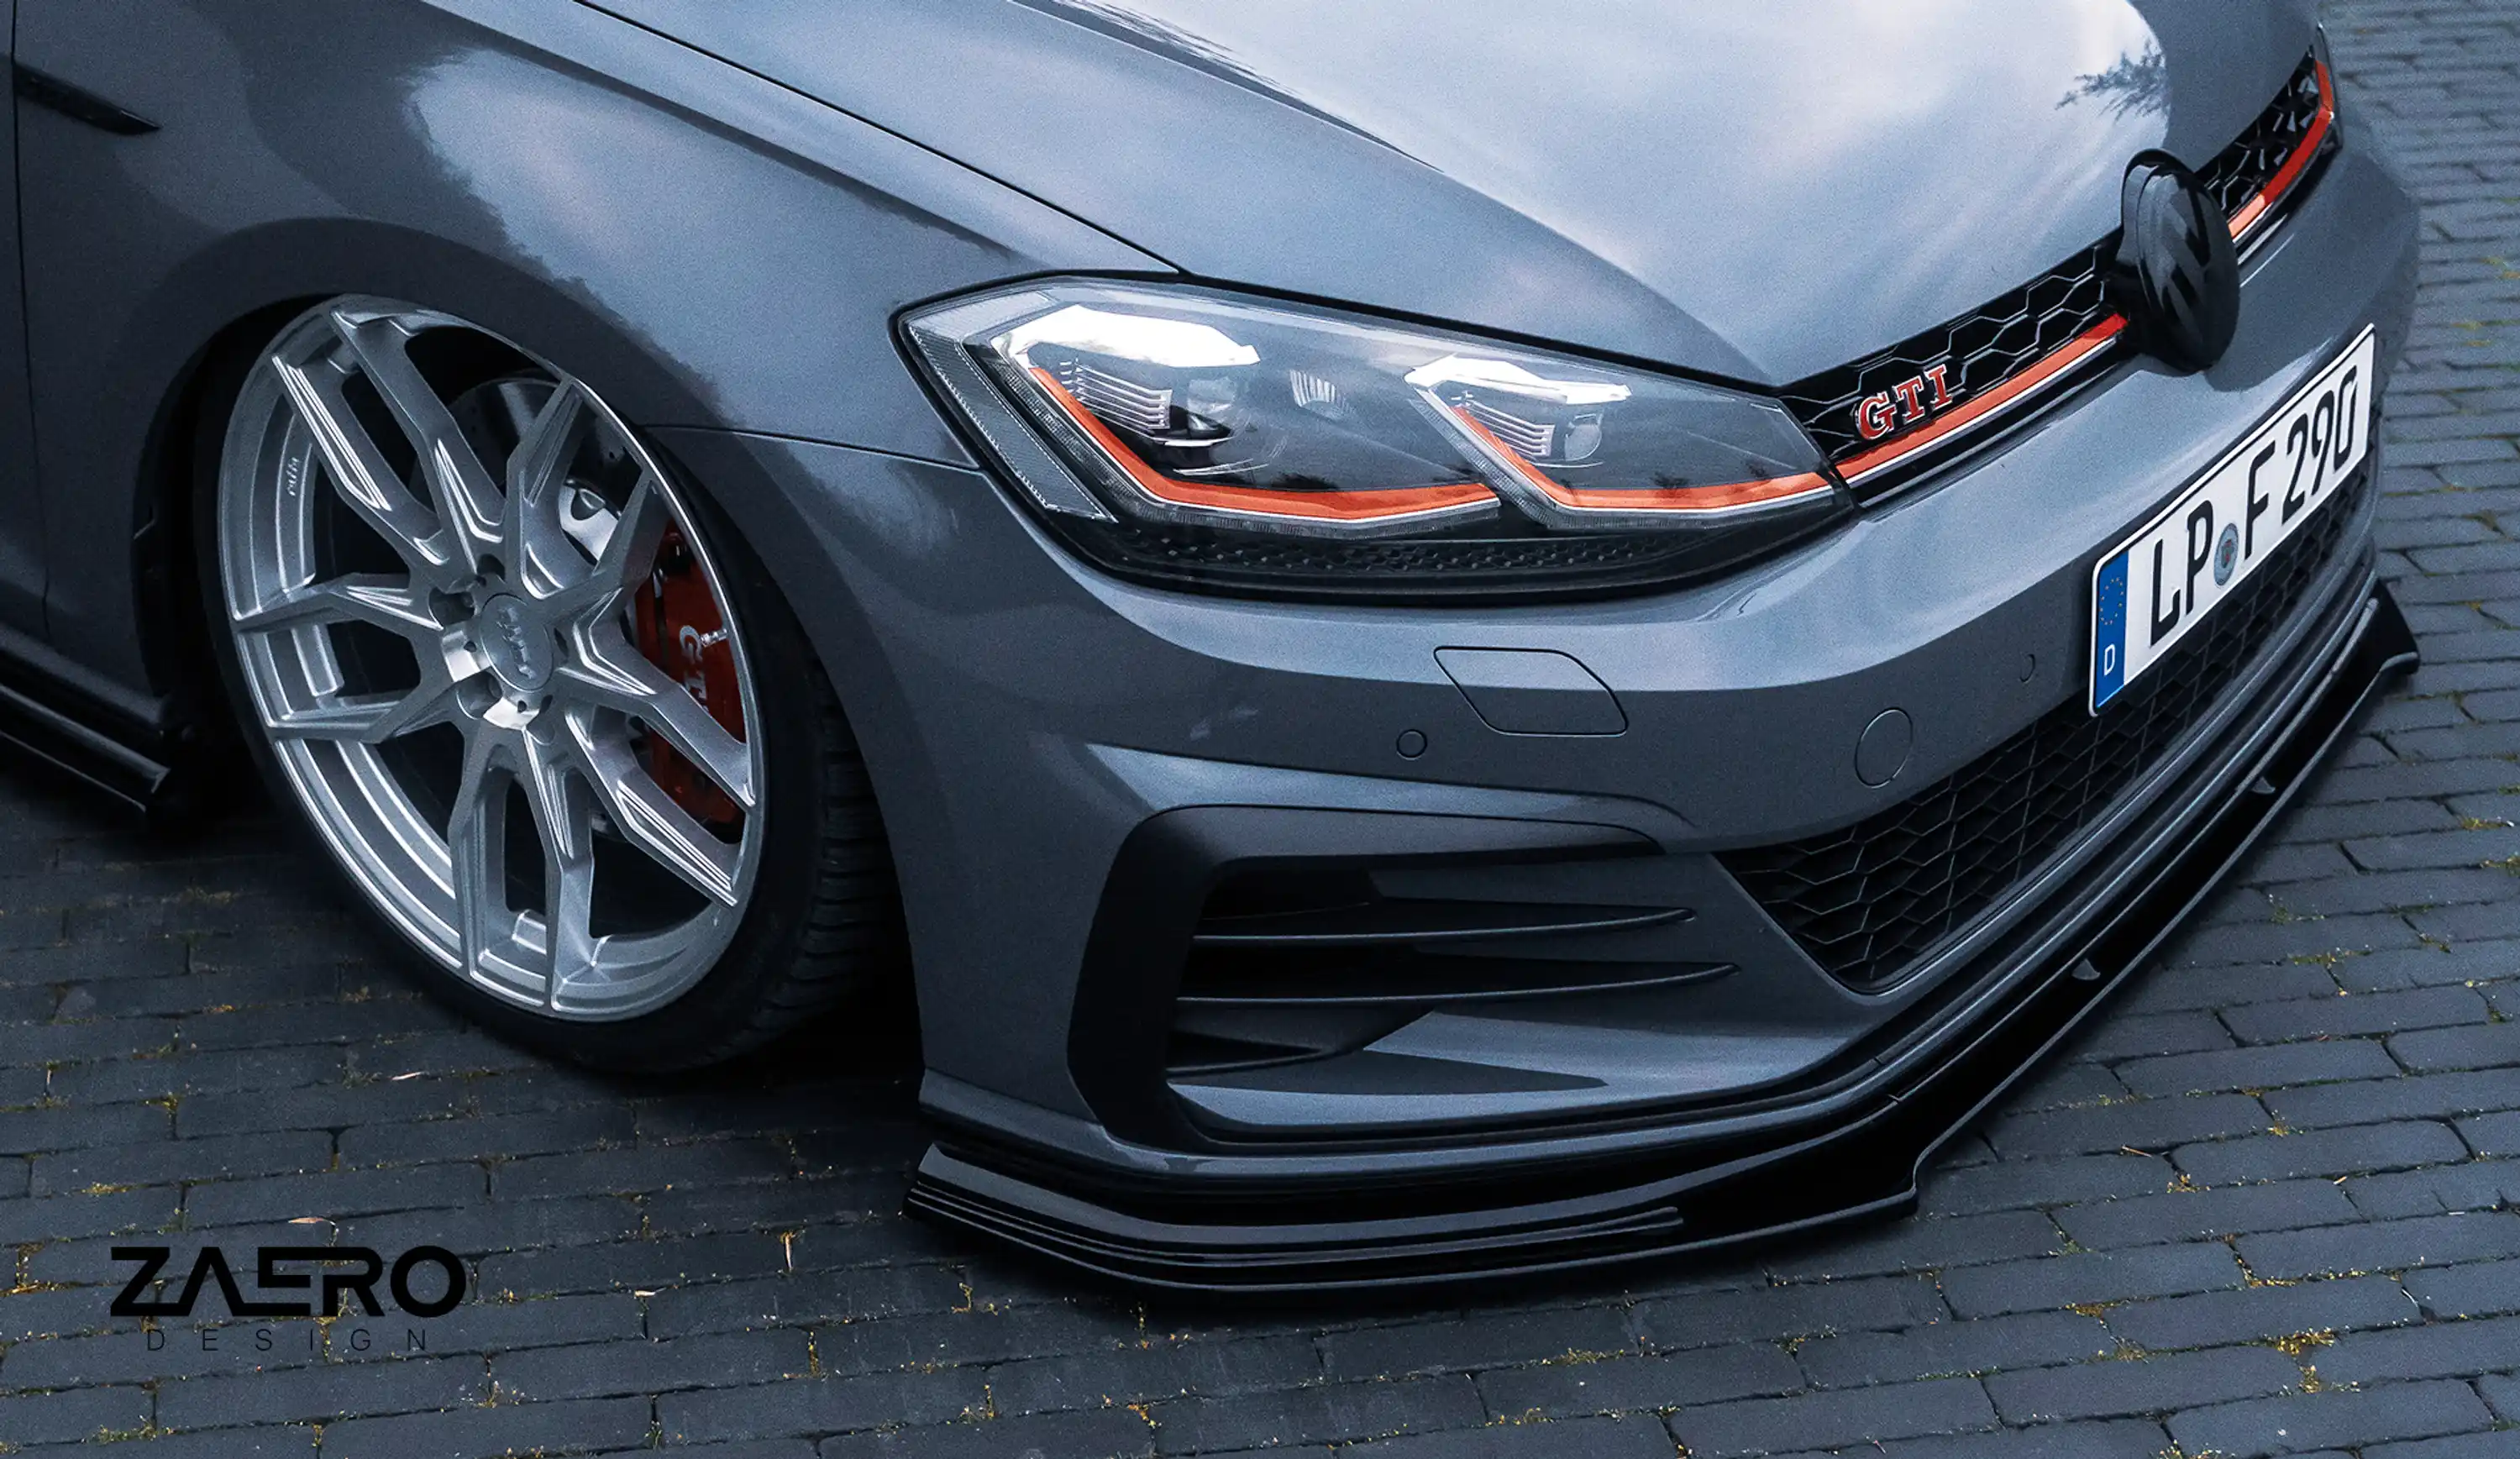 Bodykit front spoiler diffuser sill ABS for VW Golf 7 GTI TCR carbon look